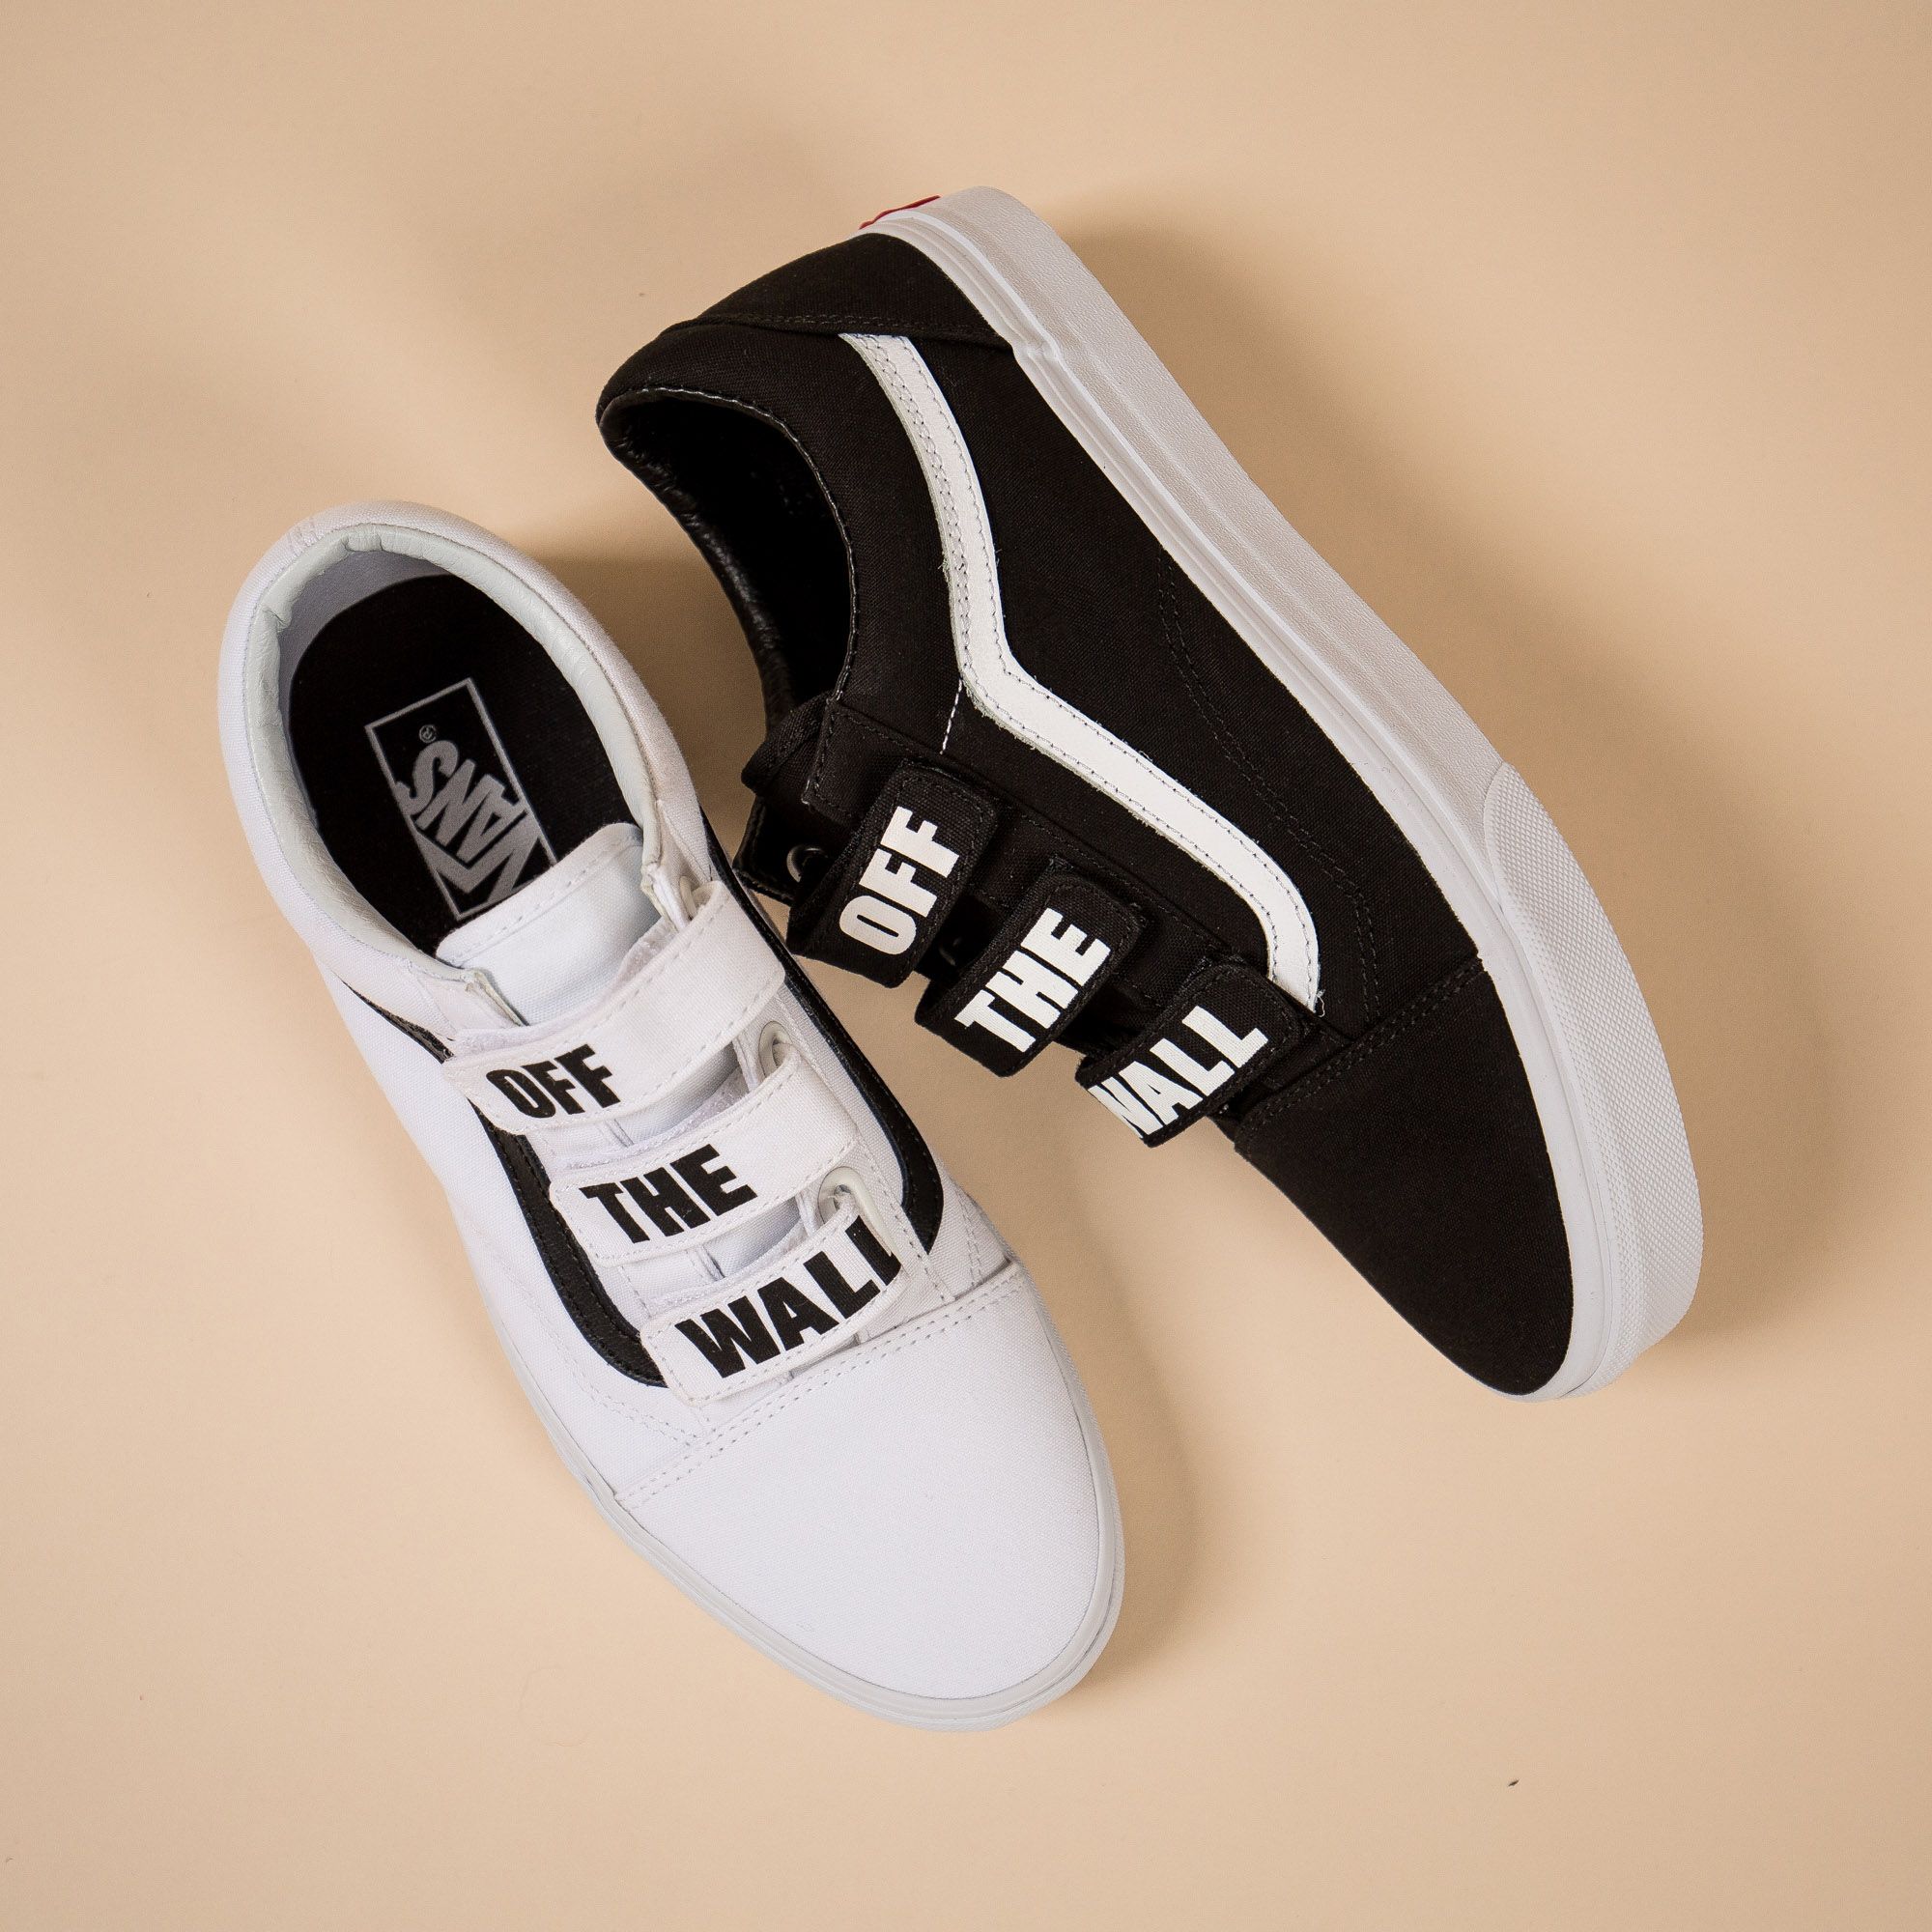 BAIT on X: "The Vans Old Skool V - Off The features branding across the velcro straps. now at https://t.co/Q5ApgF2vVu. https://t.co/oeoau4o8fG" / X